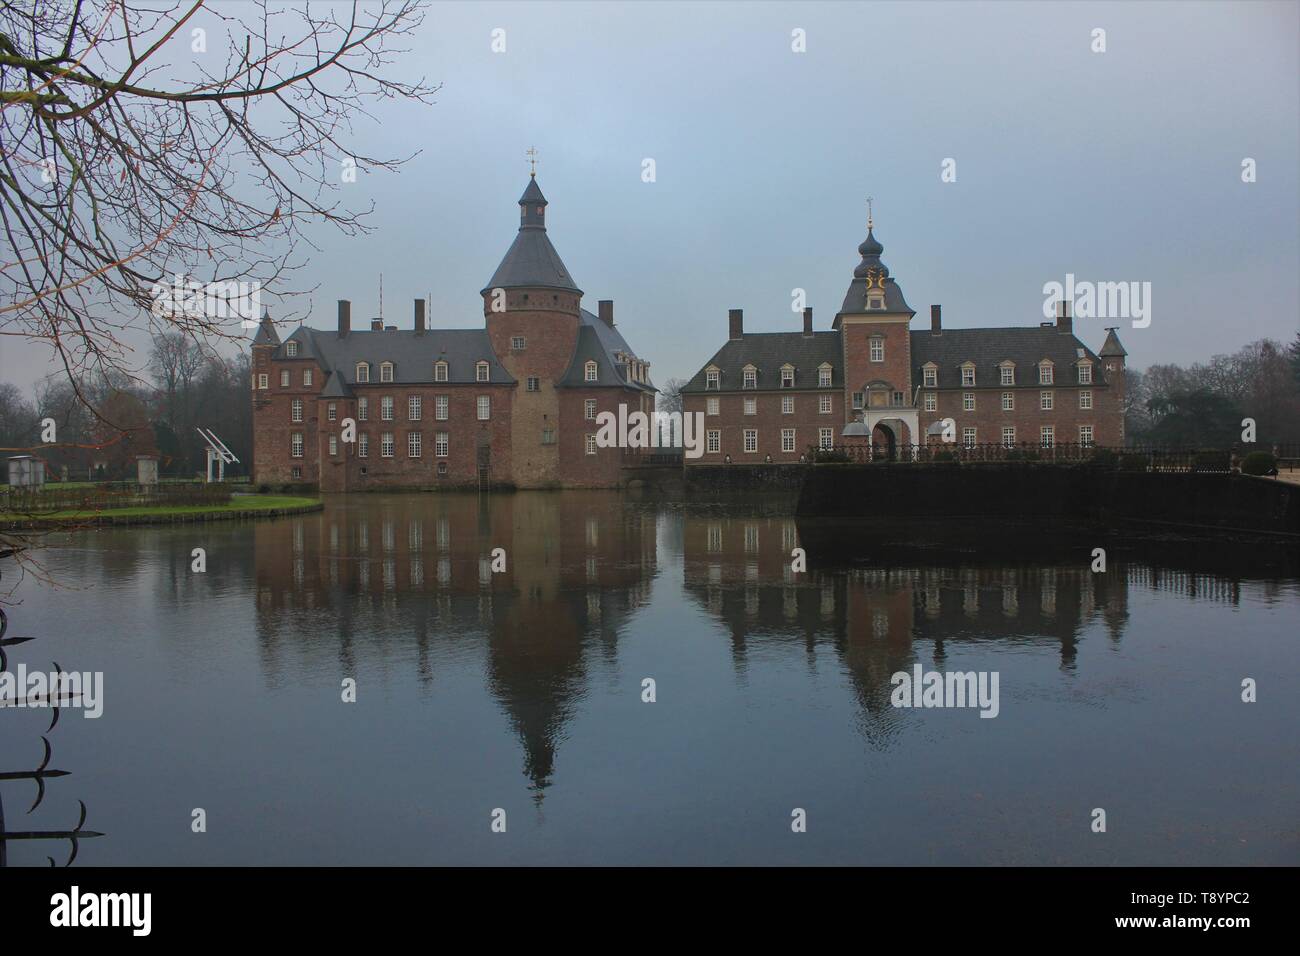 Anholt Moated Castle near Isselburg, Germany Stock Photo